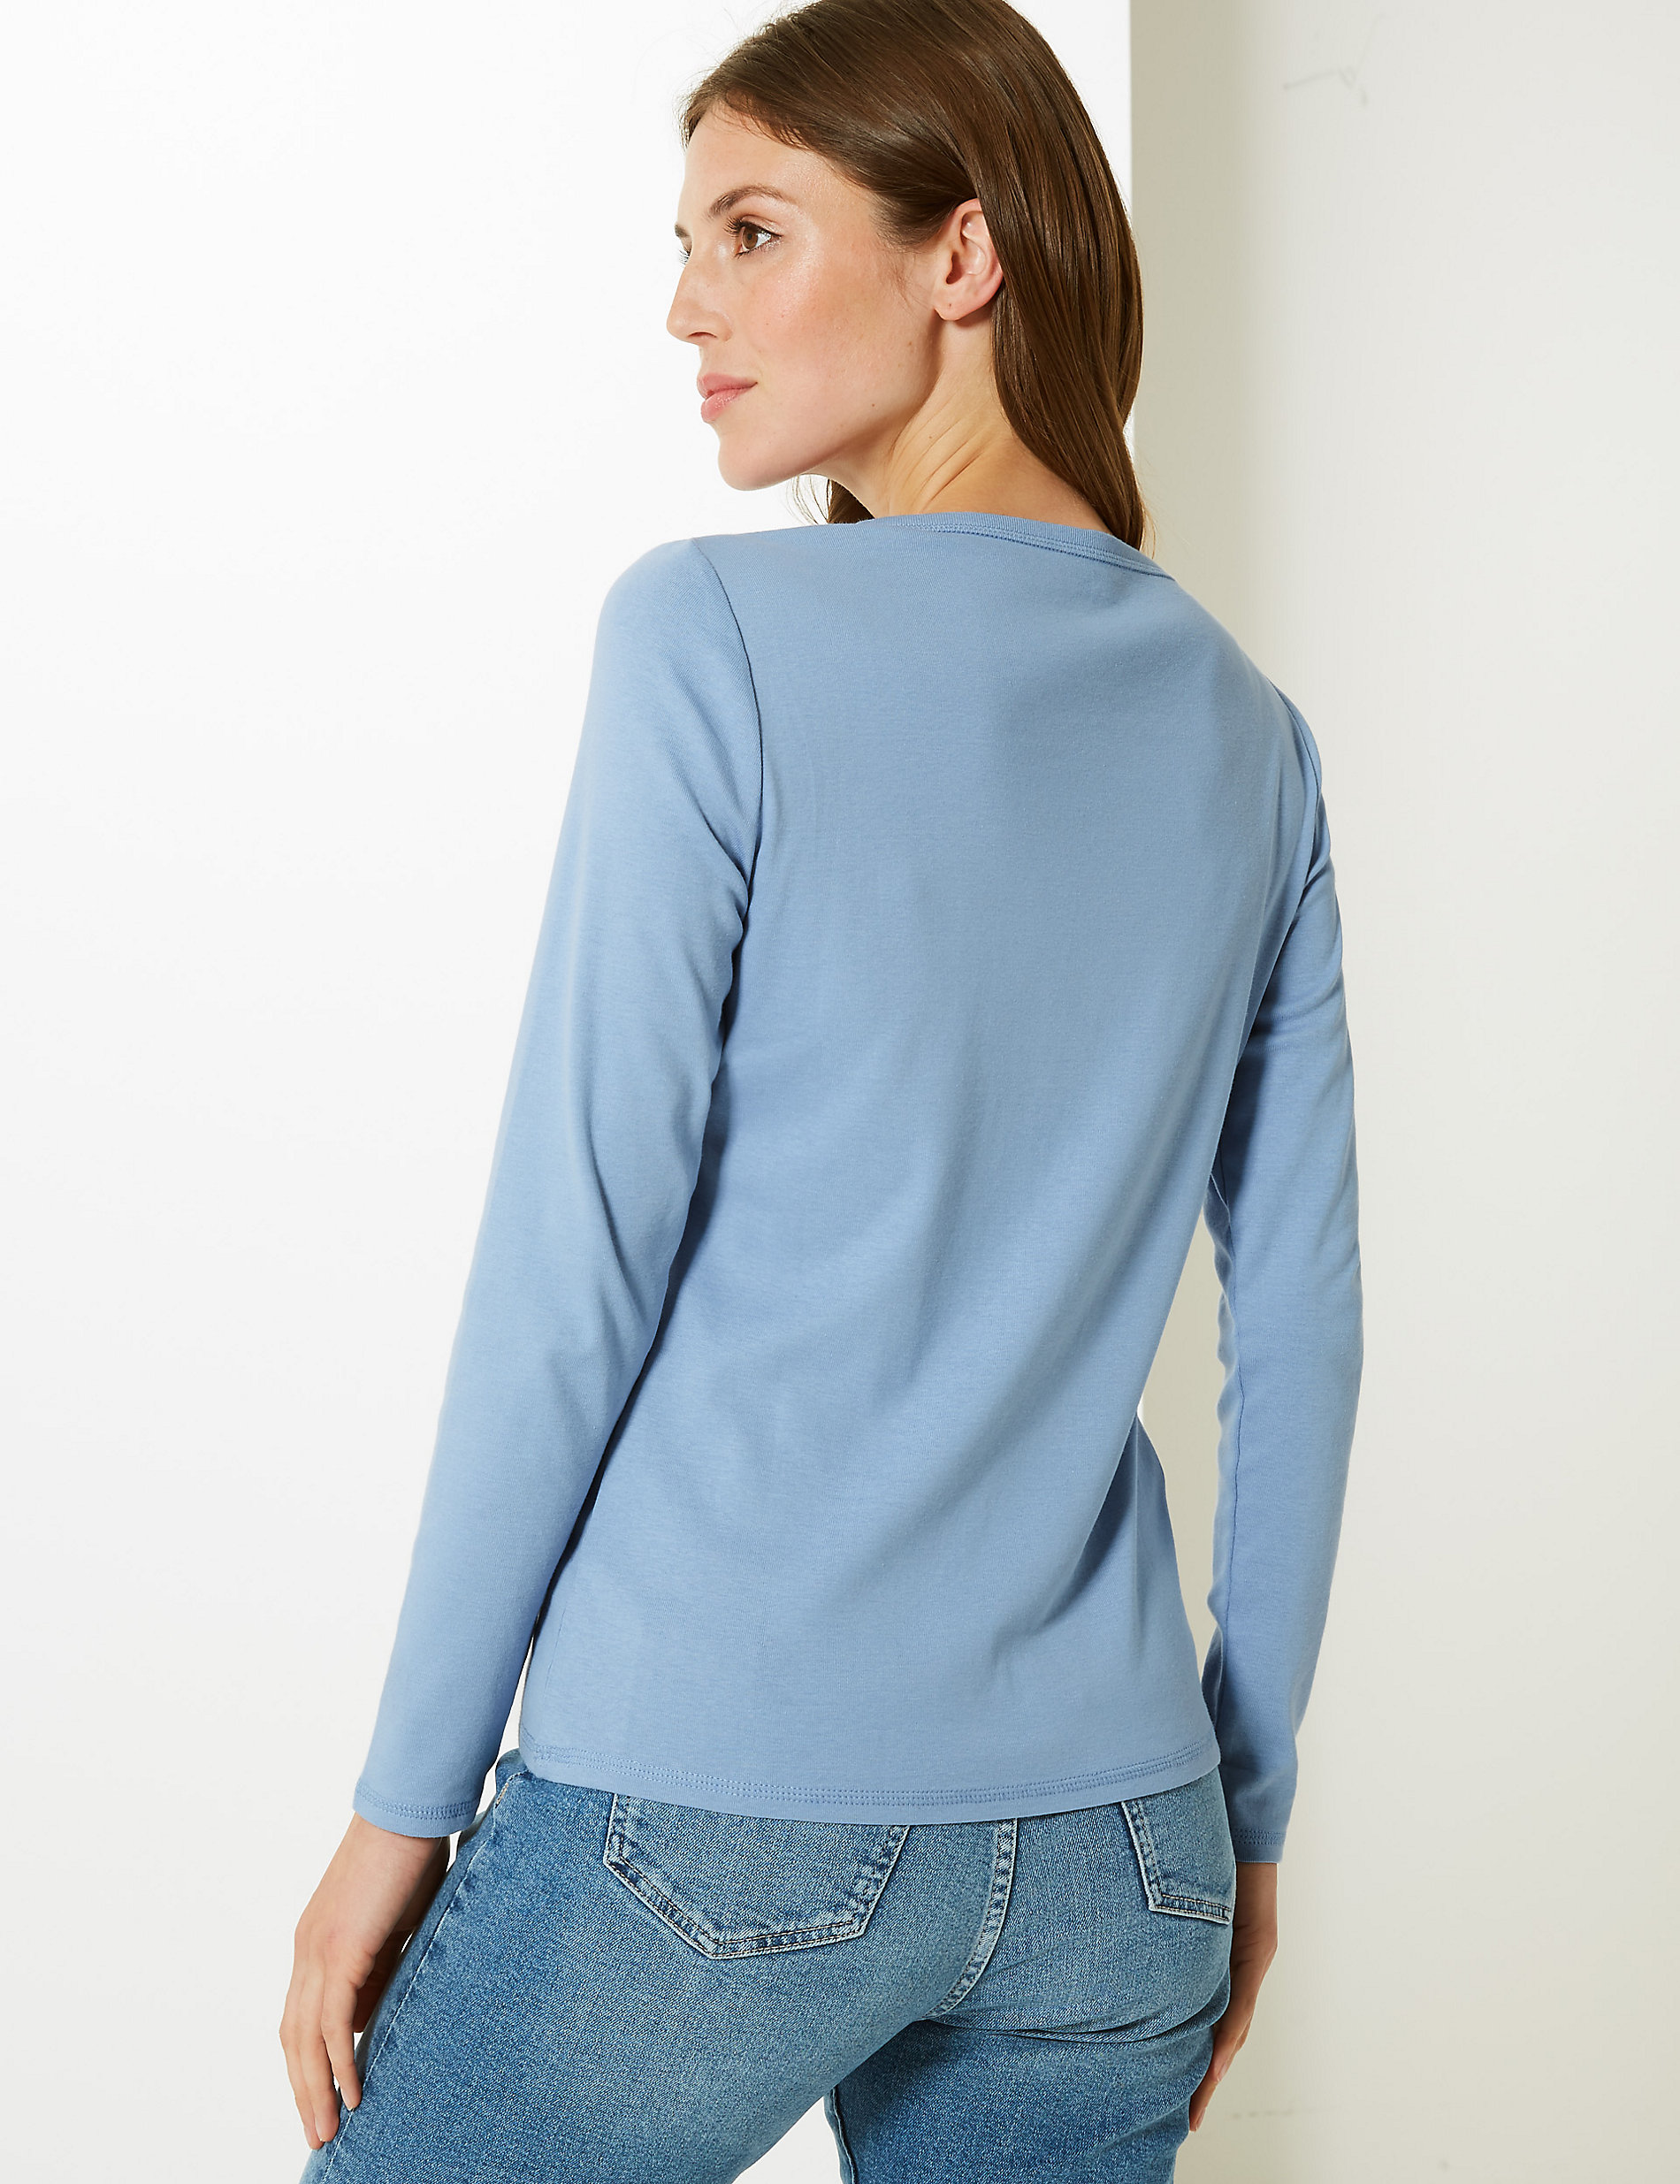 Marks & Spencer Womens Round Neck Fine Ribbed Top New M&S Long Sleeve T-Shirt 